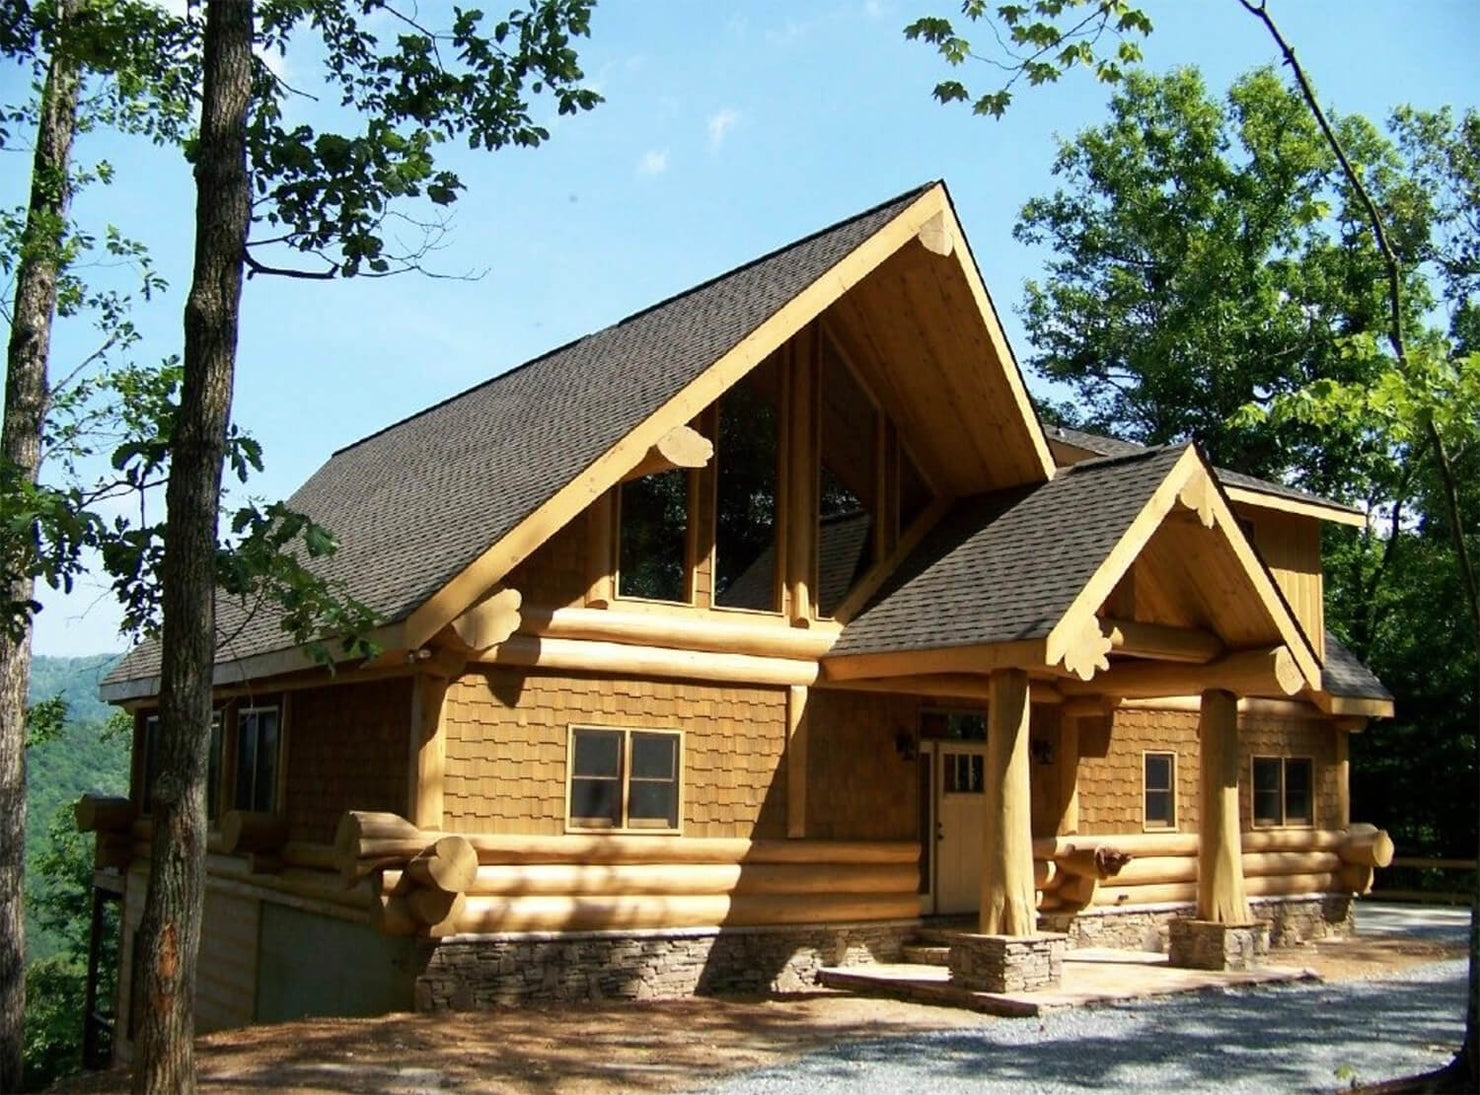 Canadian Round Log Homes